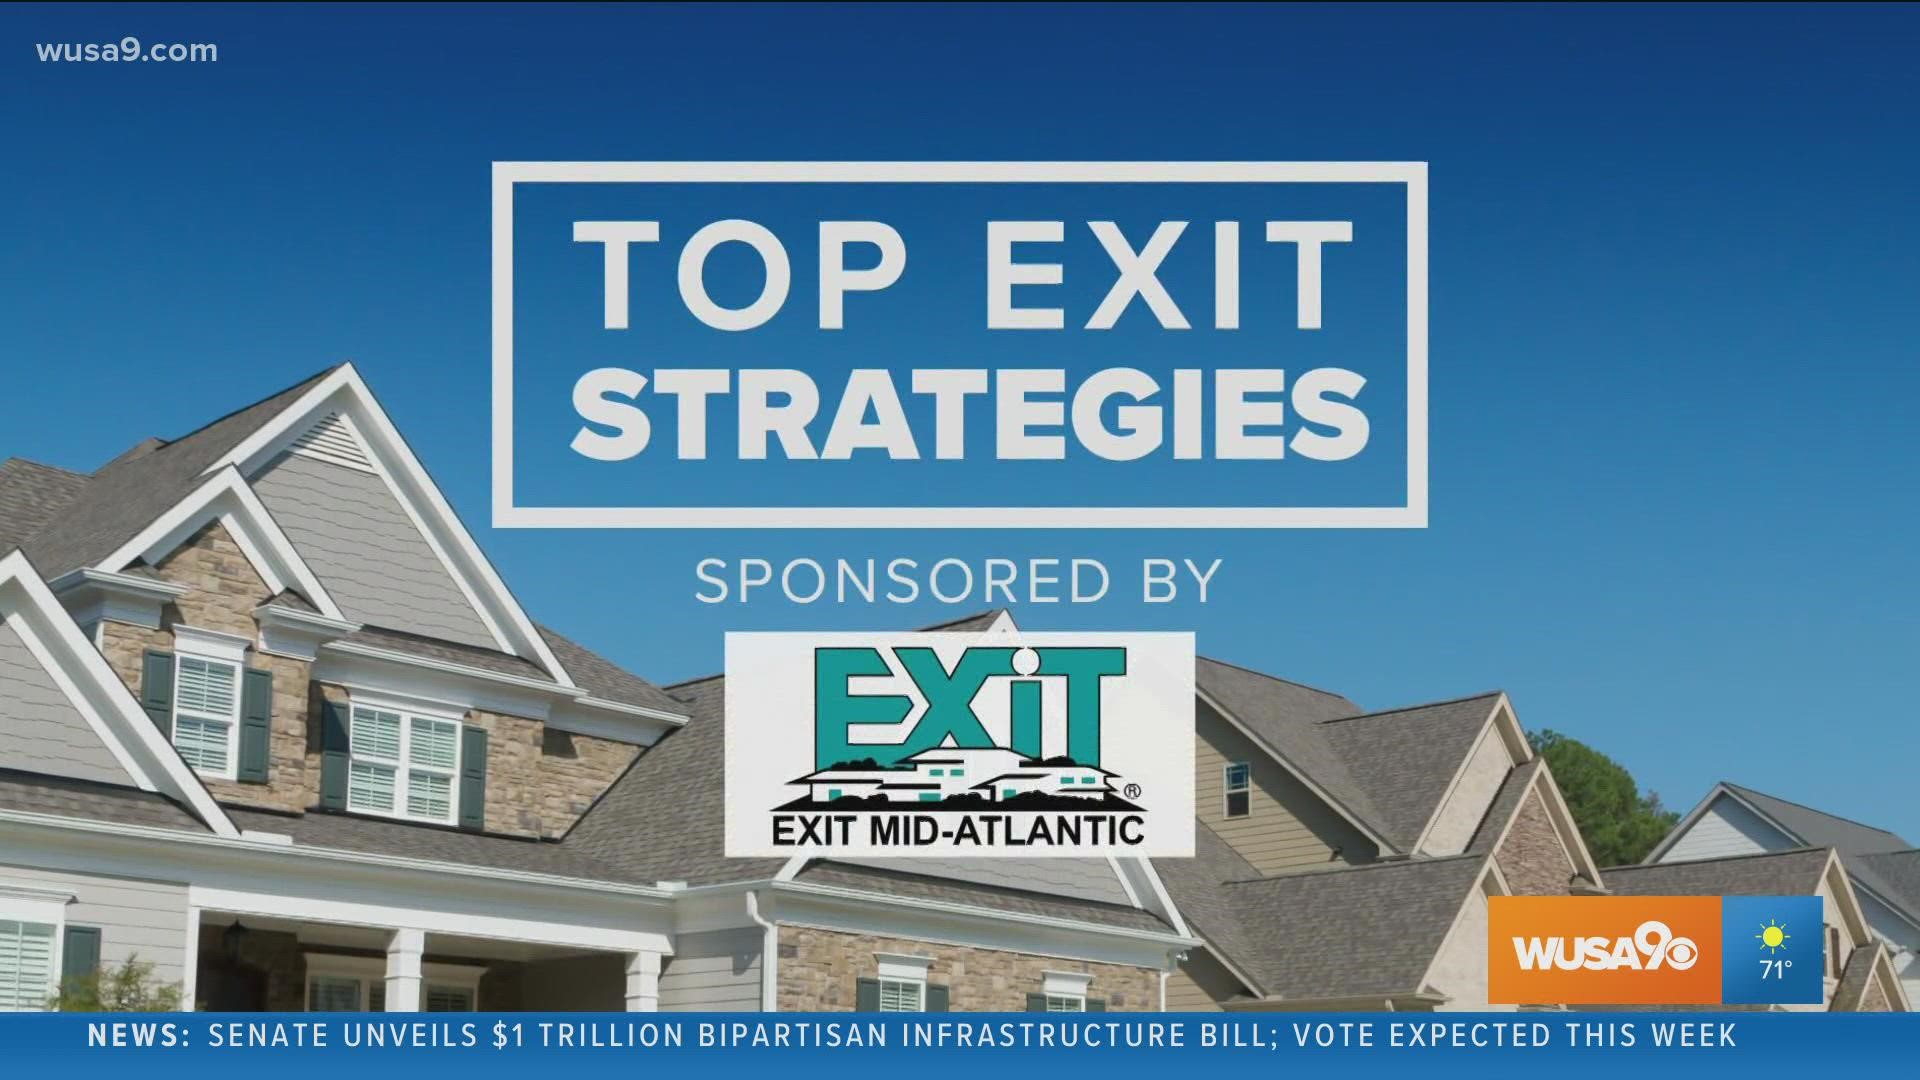 Sponsored by Exit Mid-Atlantic. Contact Pamela Dotson with Exit Norstar Realty by calling 443-845-5222 or visit ExitNorstar.com